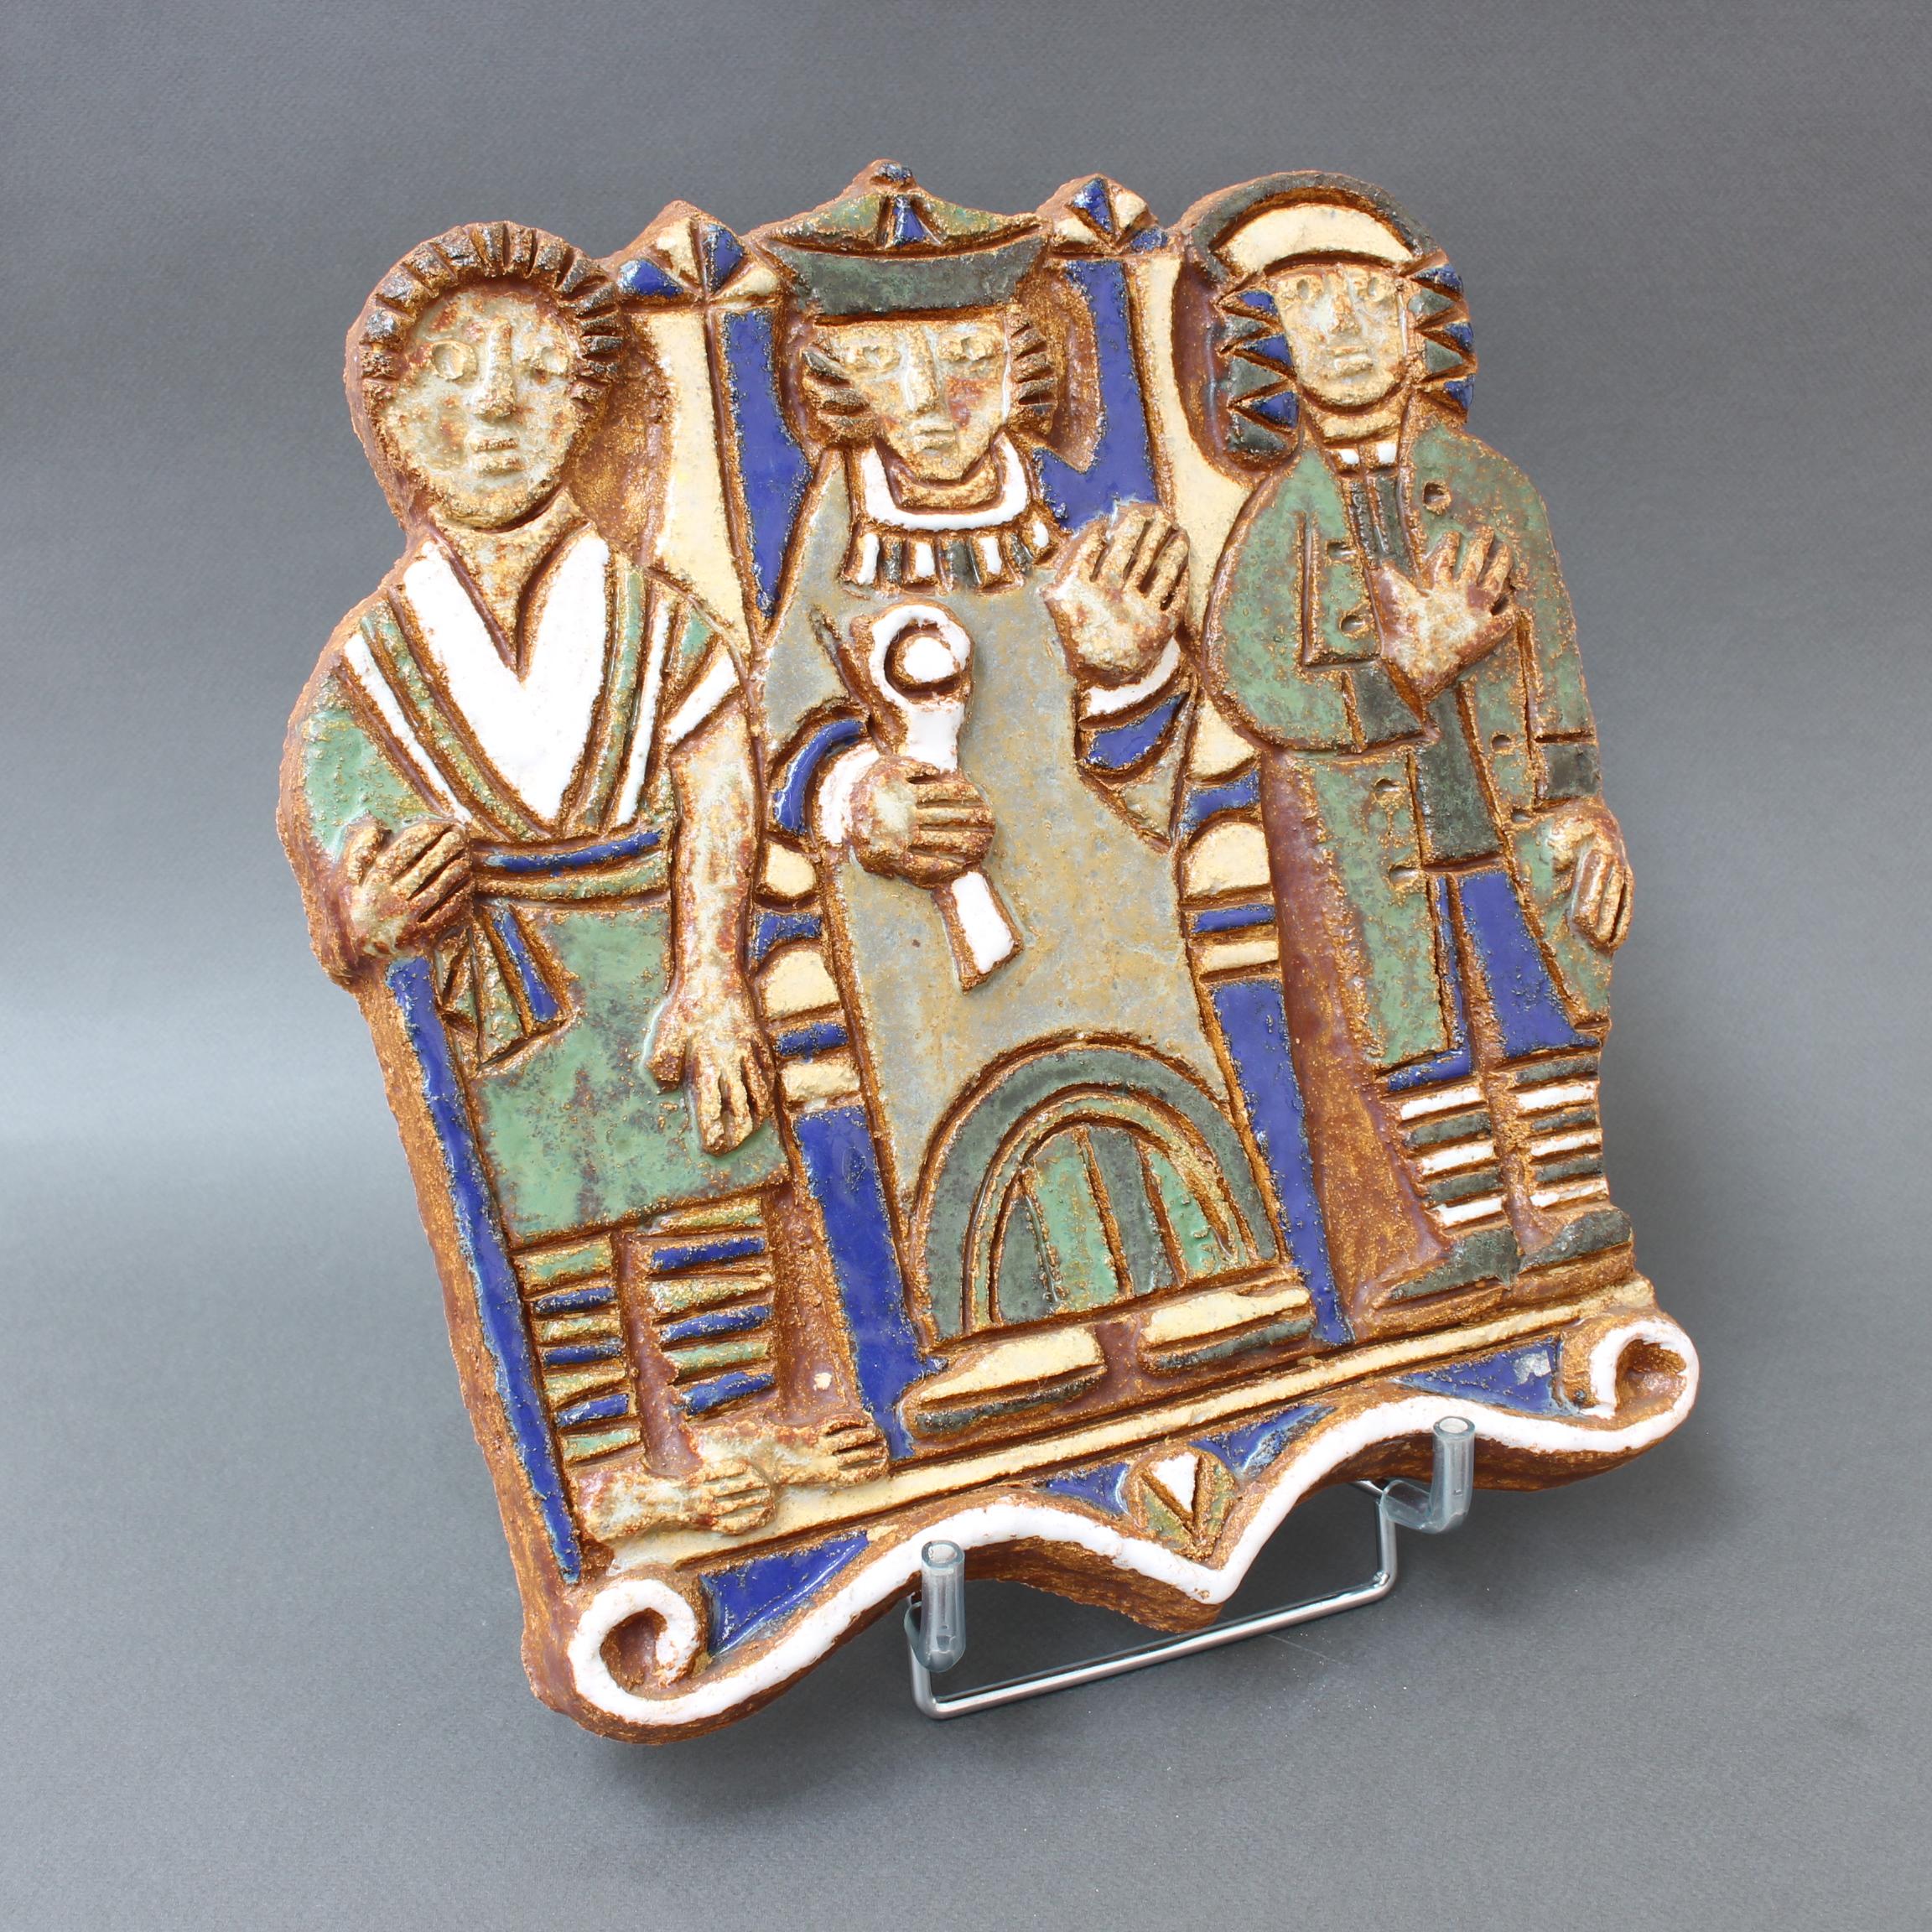 French Decorative Ceramic Wall Plaque with Three Figures by Les Argonautes 1960s For Sale 2